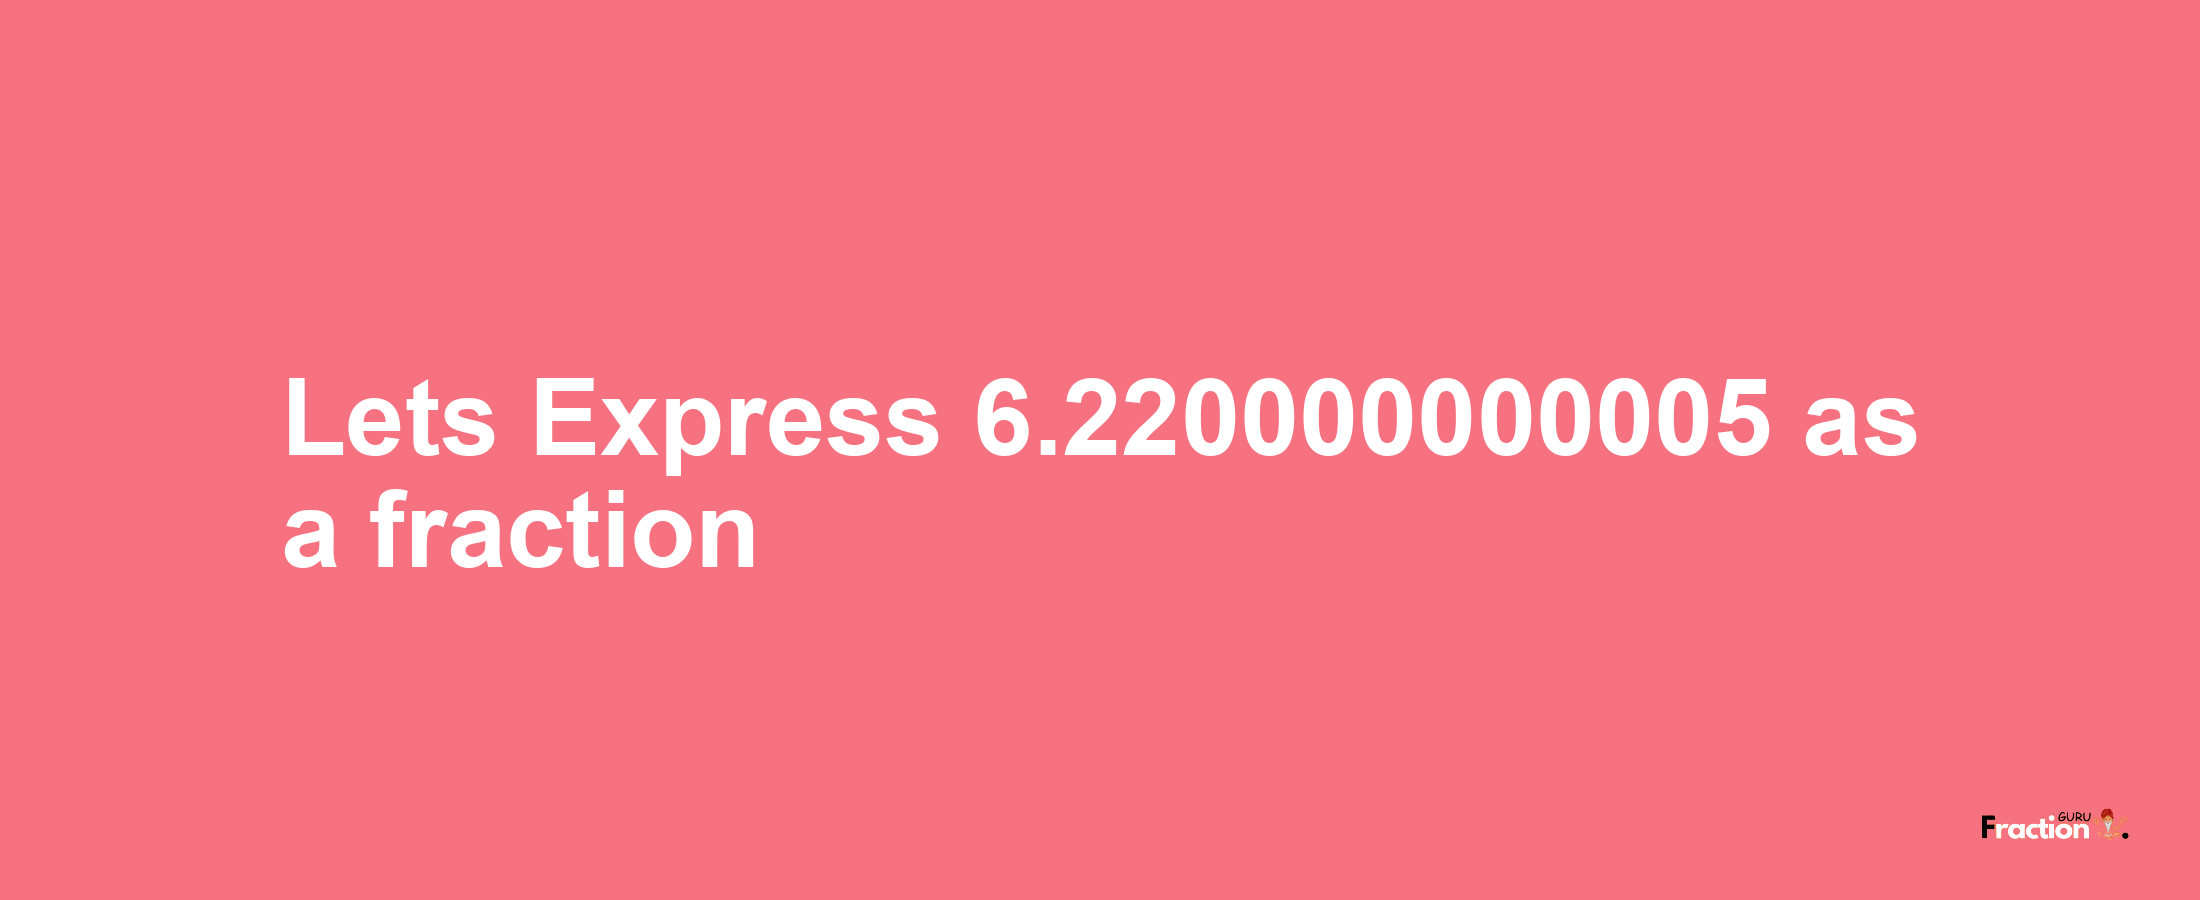 Lets Express 6.220000000005 as afraction